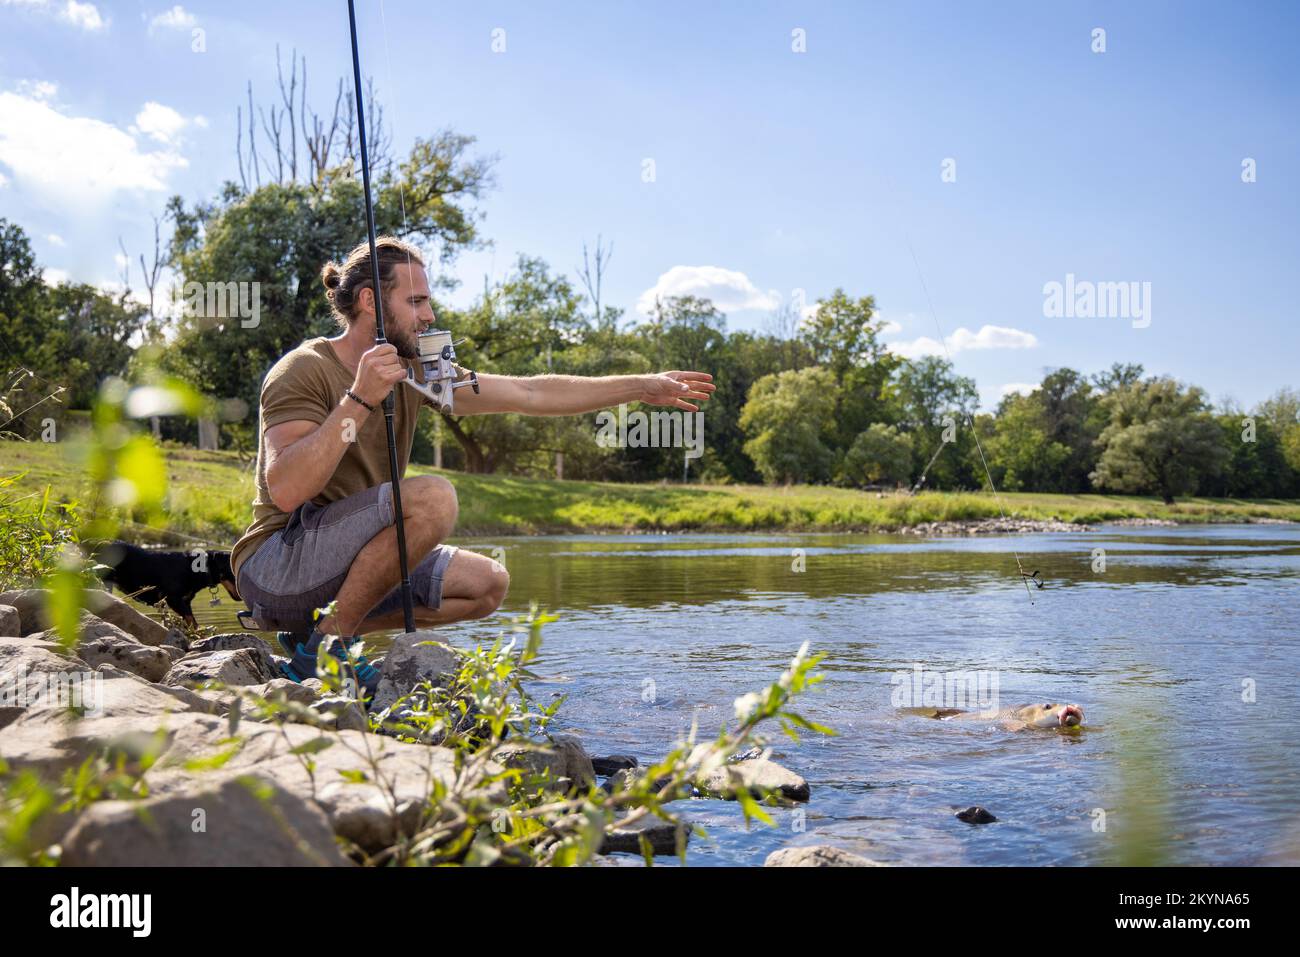 Hobby fisher caught a fish in a river Stock Photo